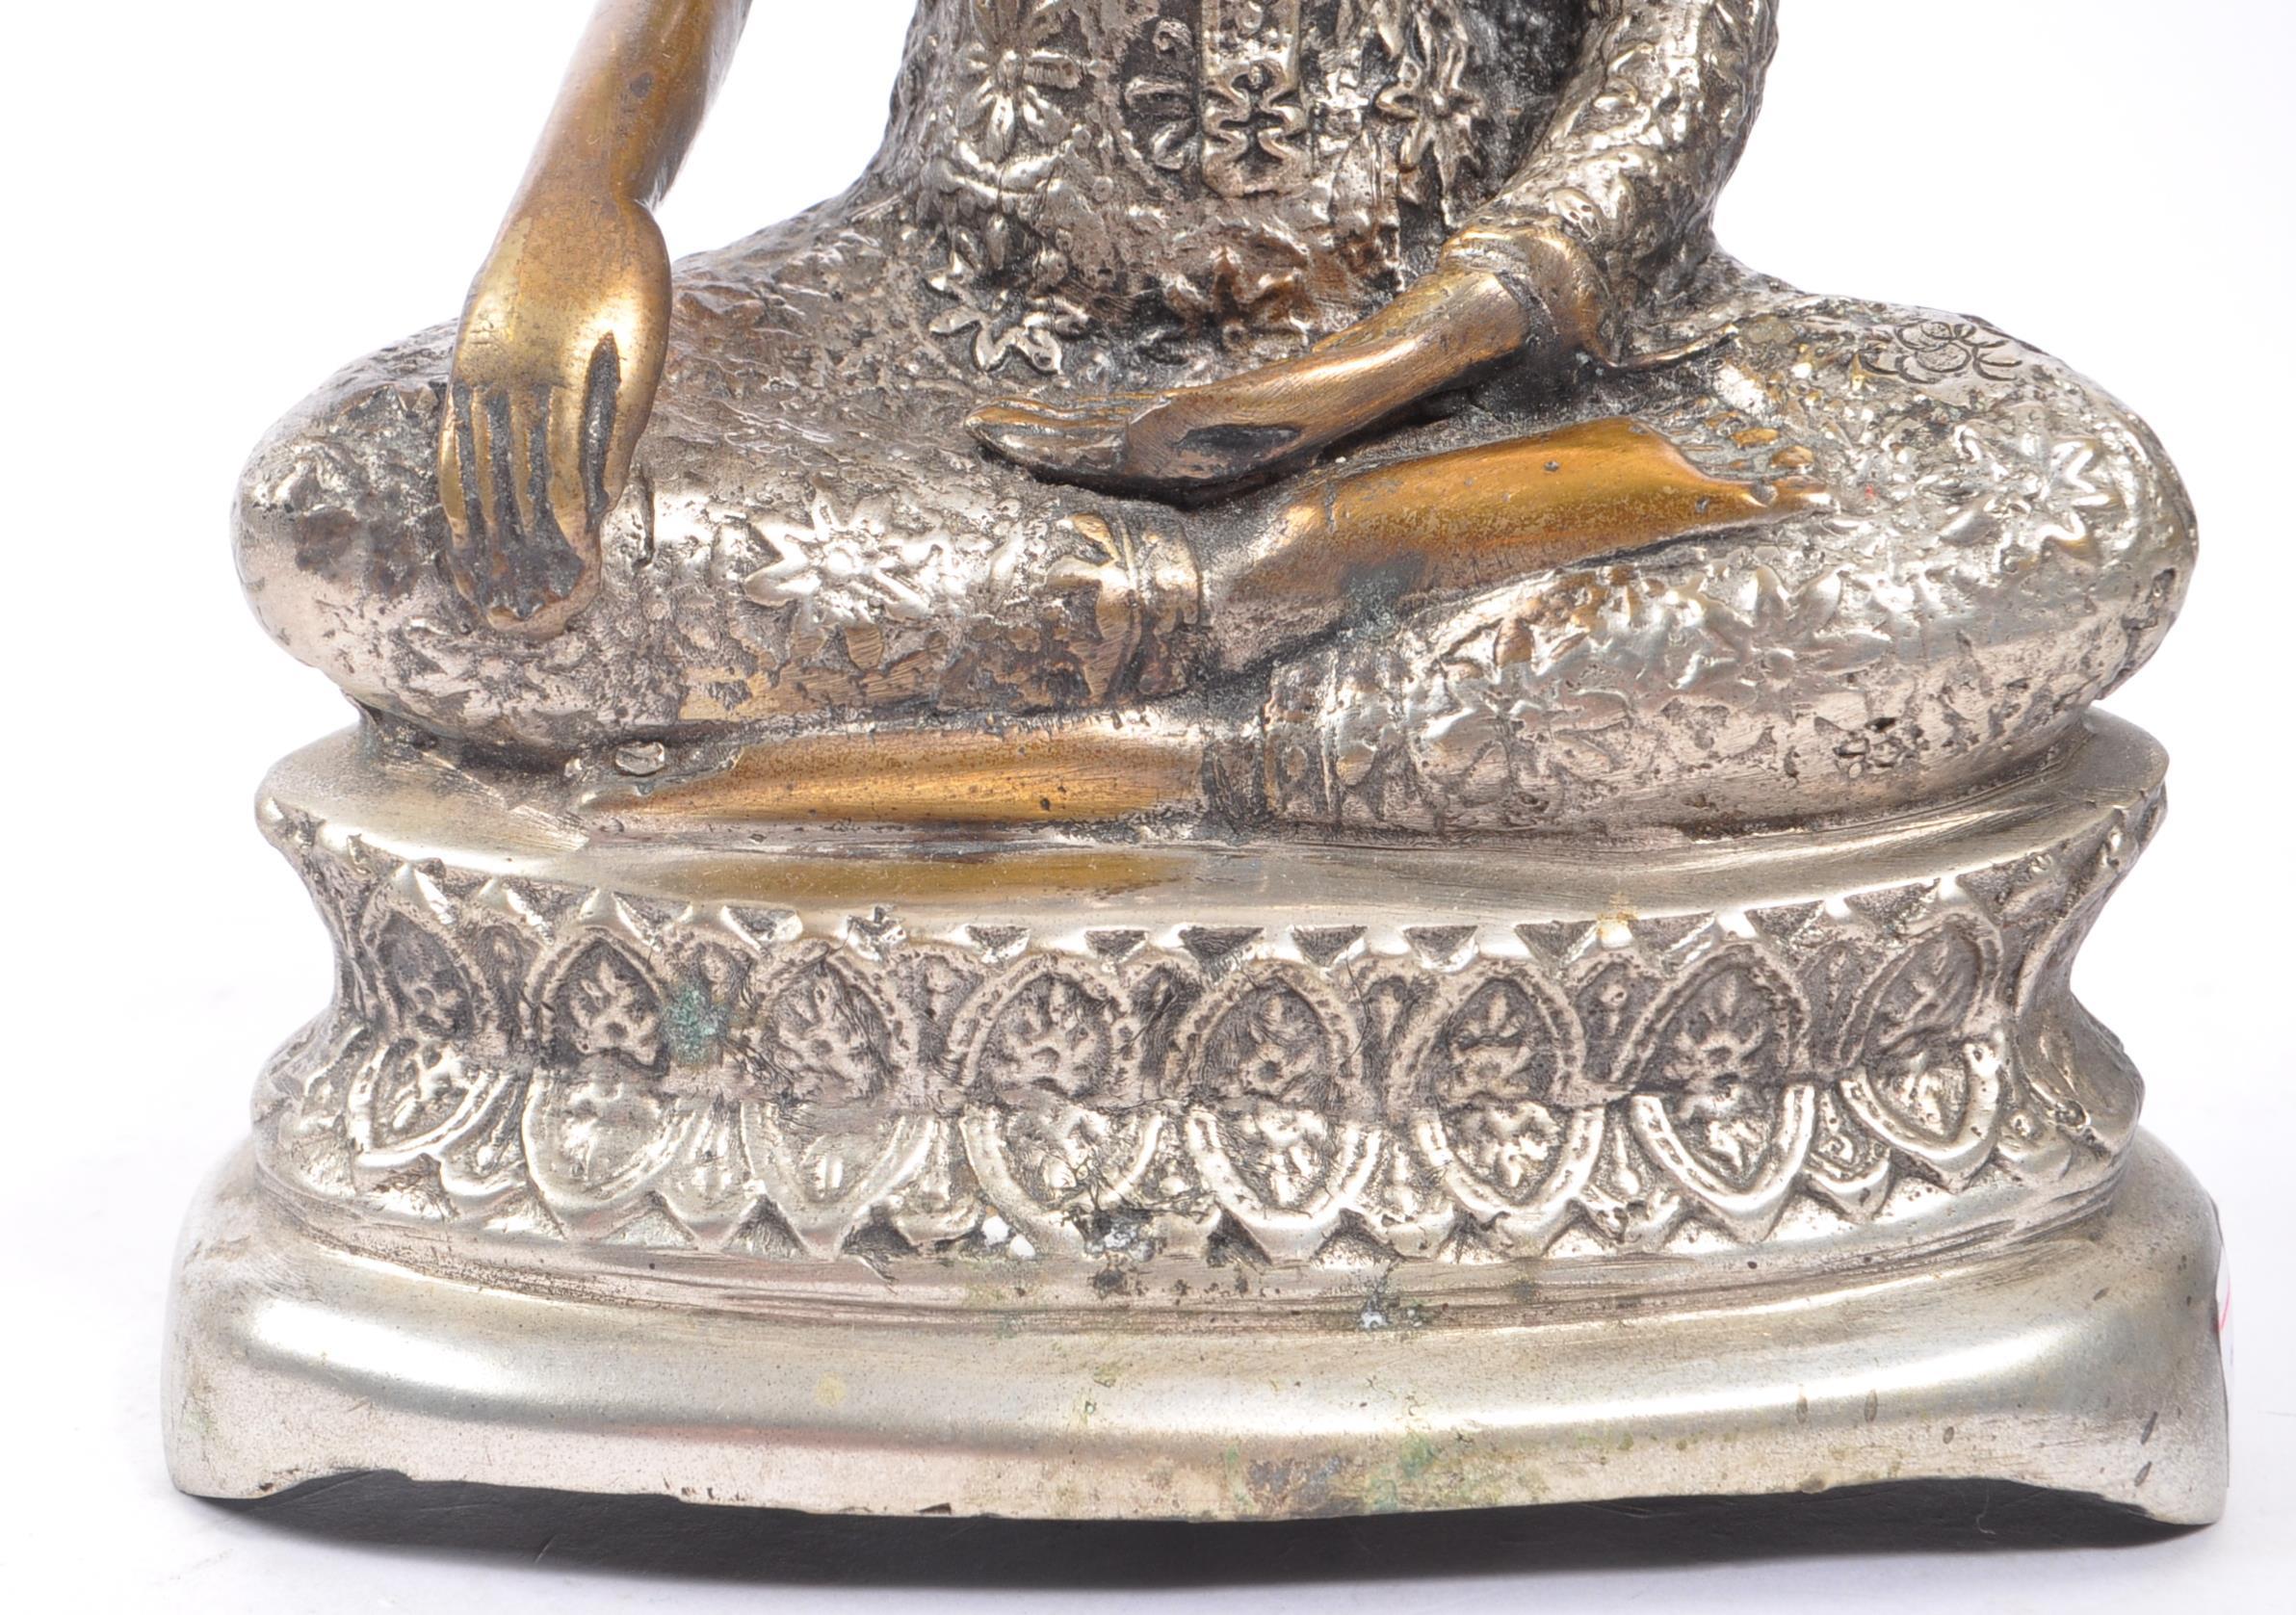 PAINTED GOLD AND SILVER BRONZE BUDDHA FIGURE - Image 6 of 7